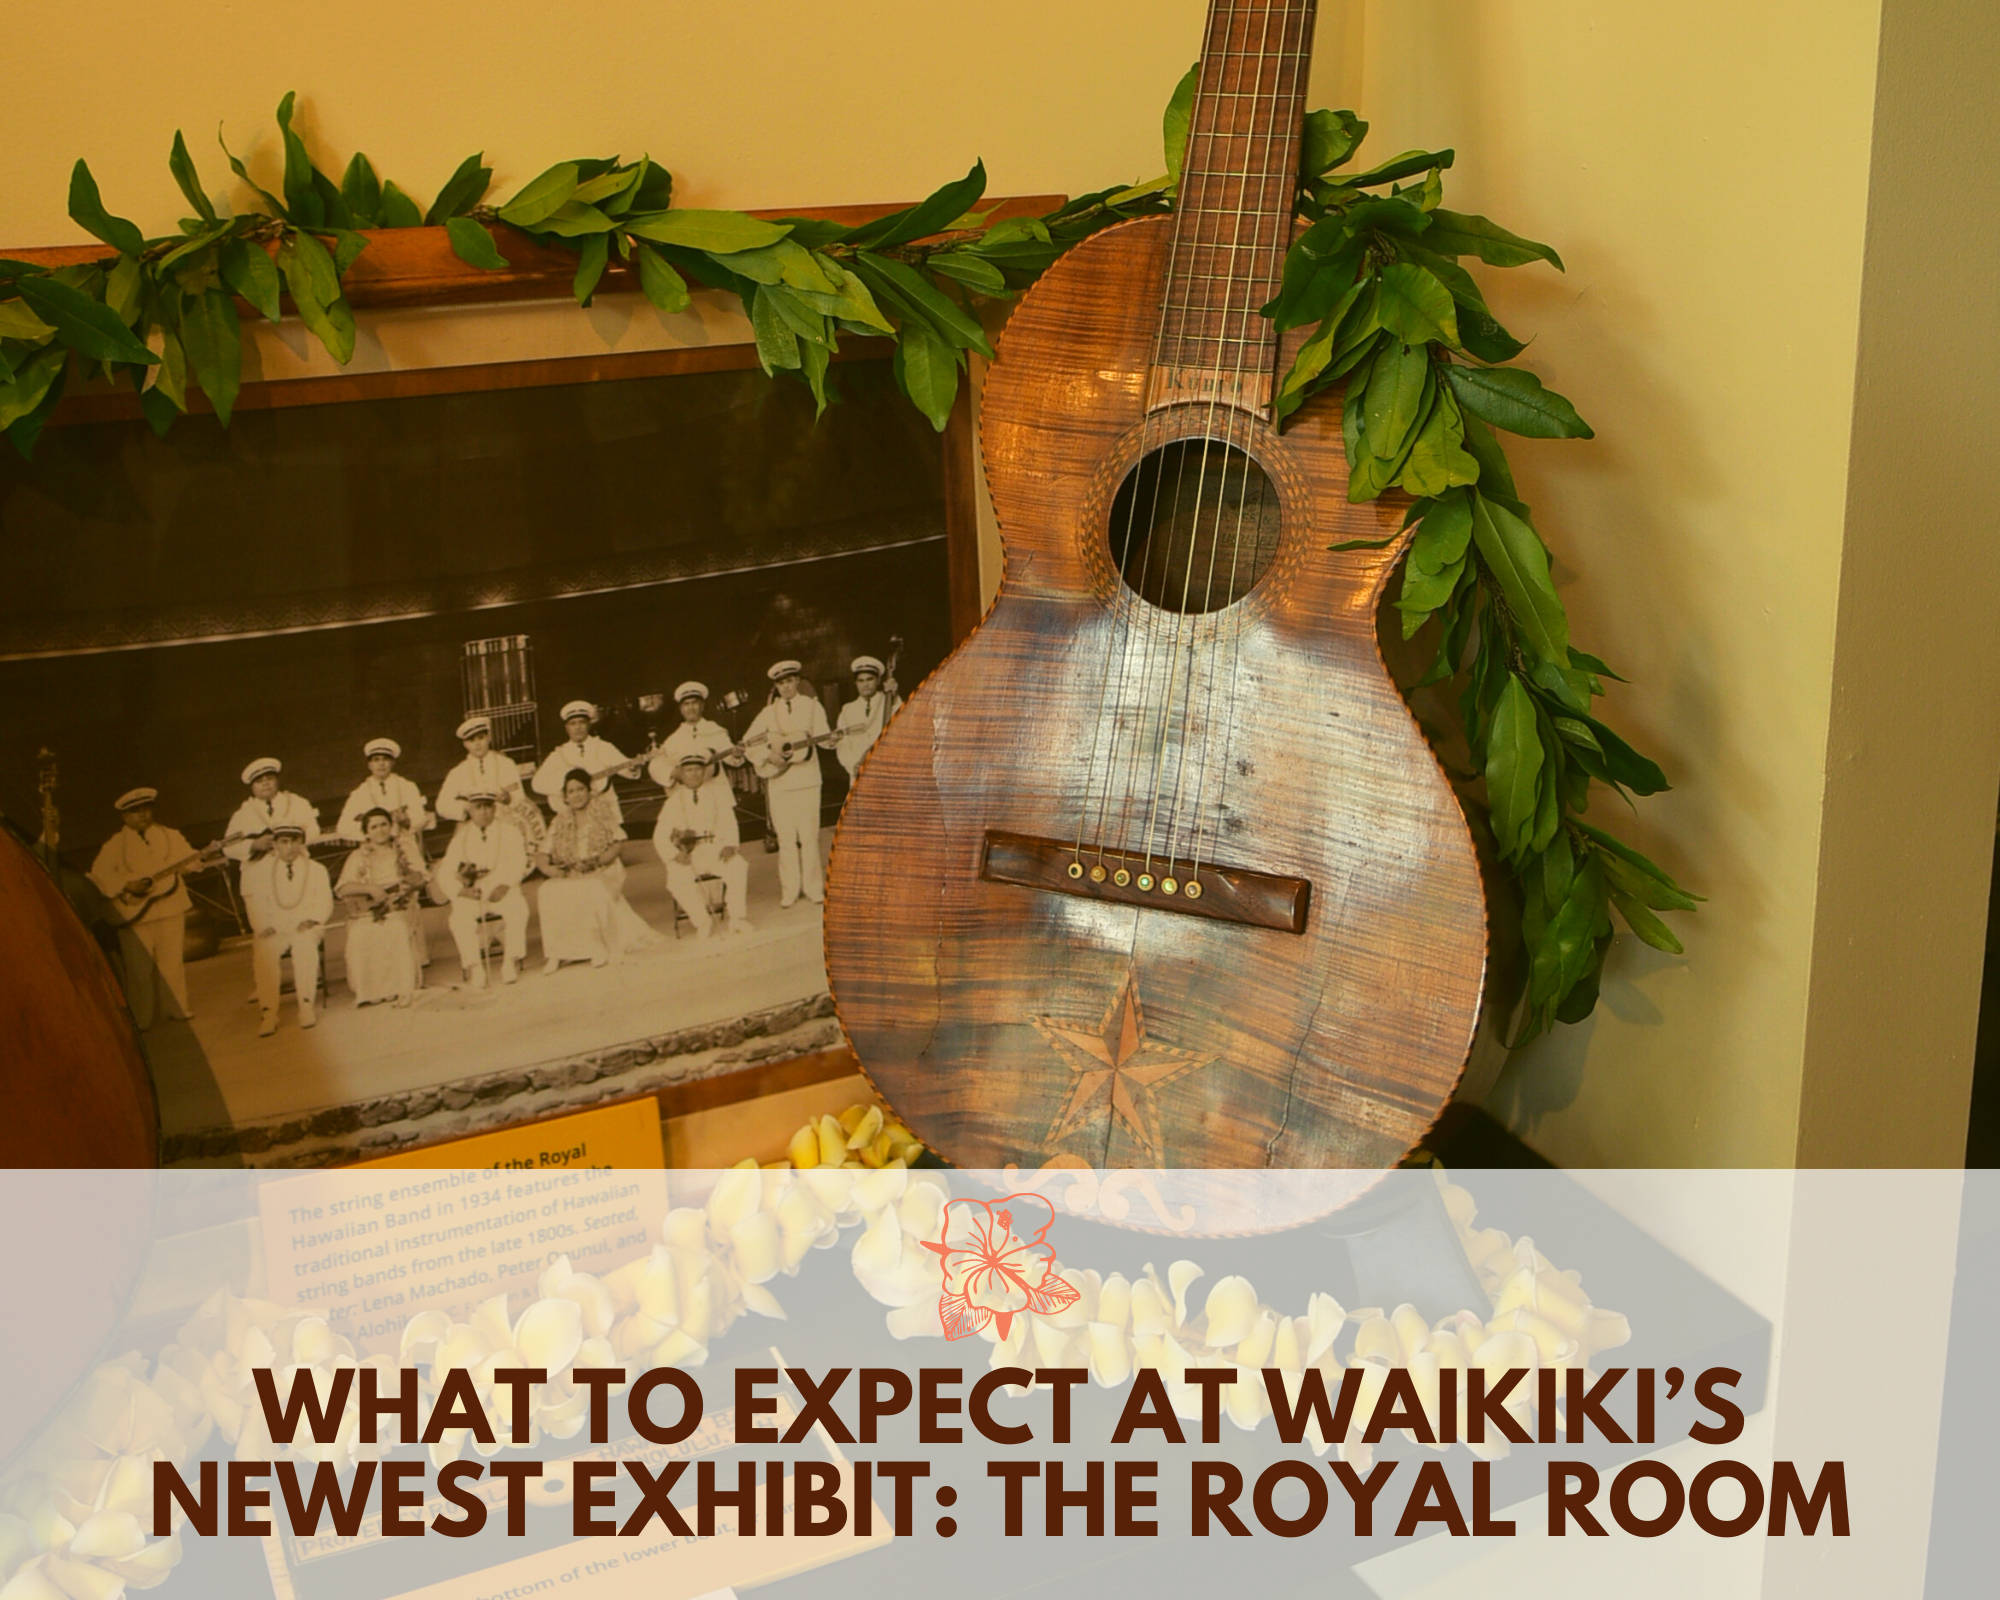 What to Expect at Waikiki’s Newest Exhibit: The Royal Room